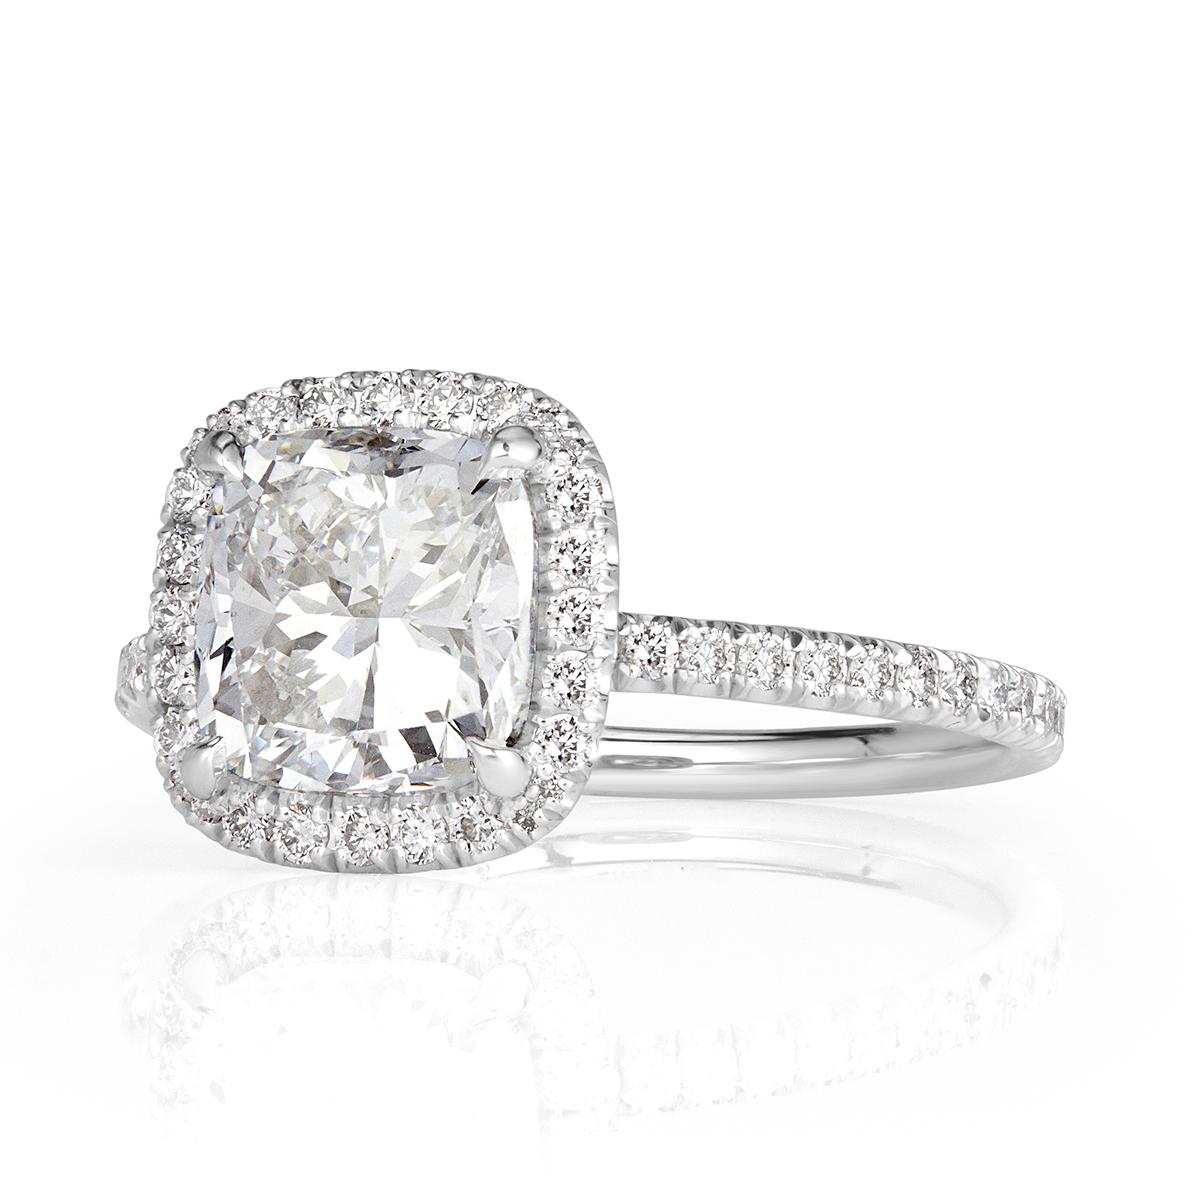 Created in platinum, this mesmerizing diamond engagement ring showcases a stunning 2.01ct cushion cut centerd diamond, GIA certified at F-SI1. It is accented by a matching halo of round brilliant cut diamonds as well as one row of sparkling diamonds